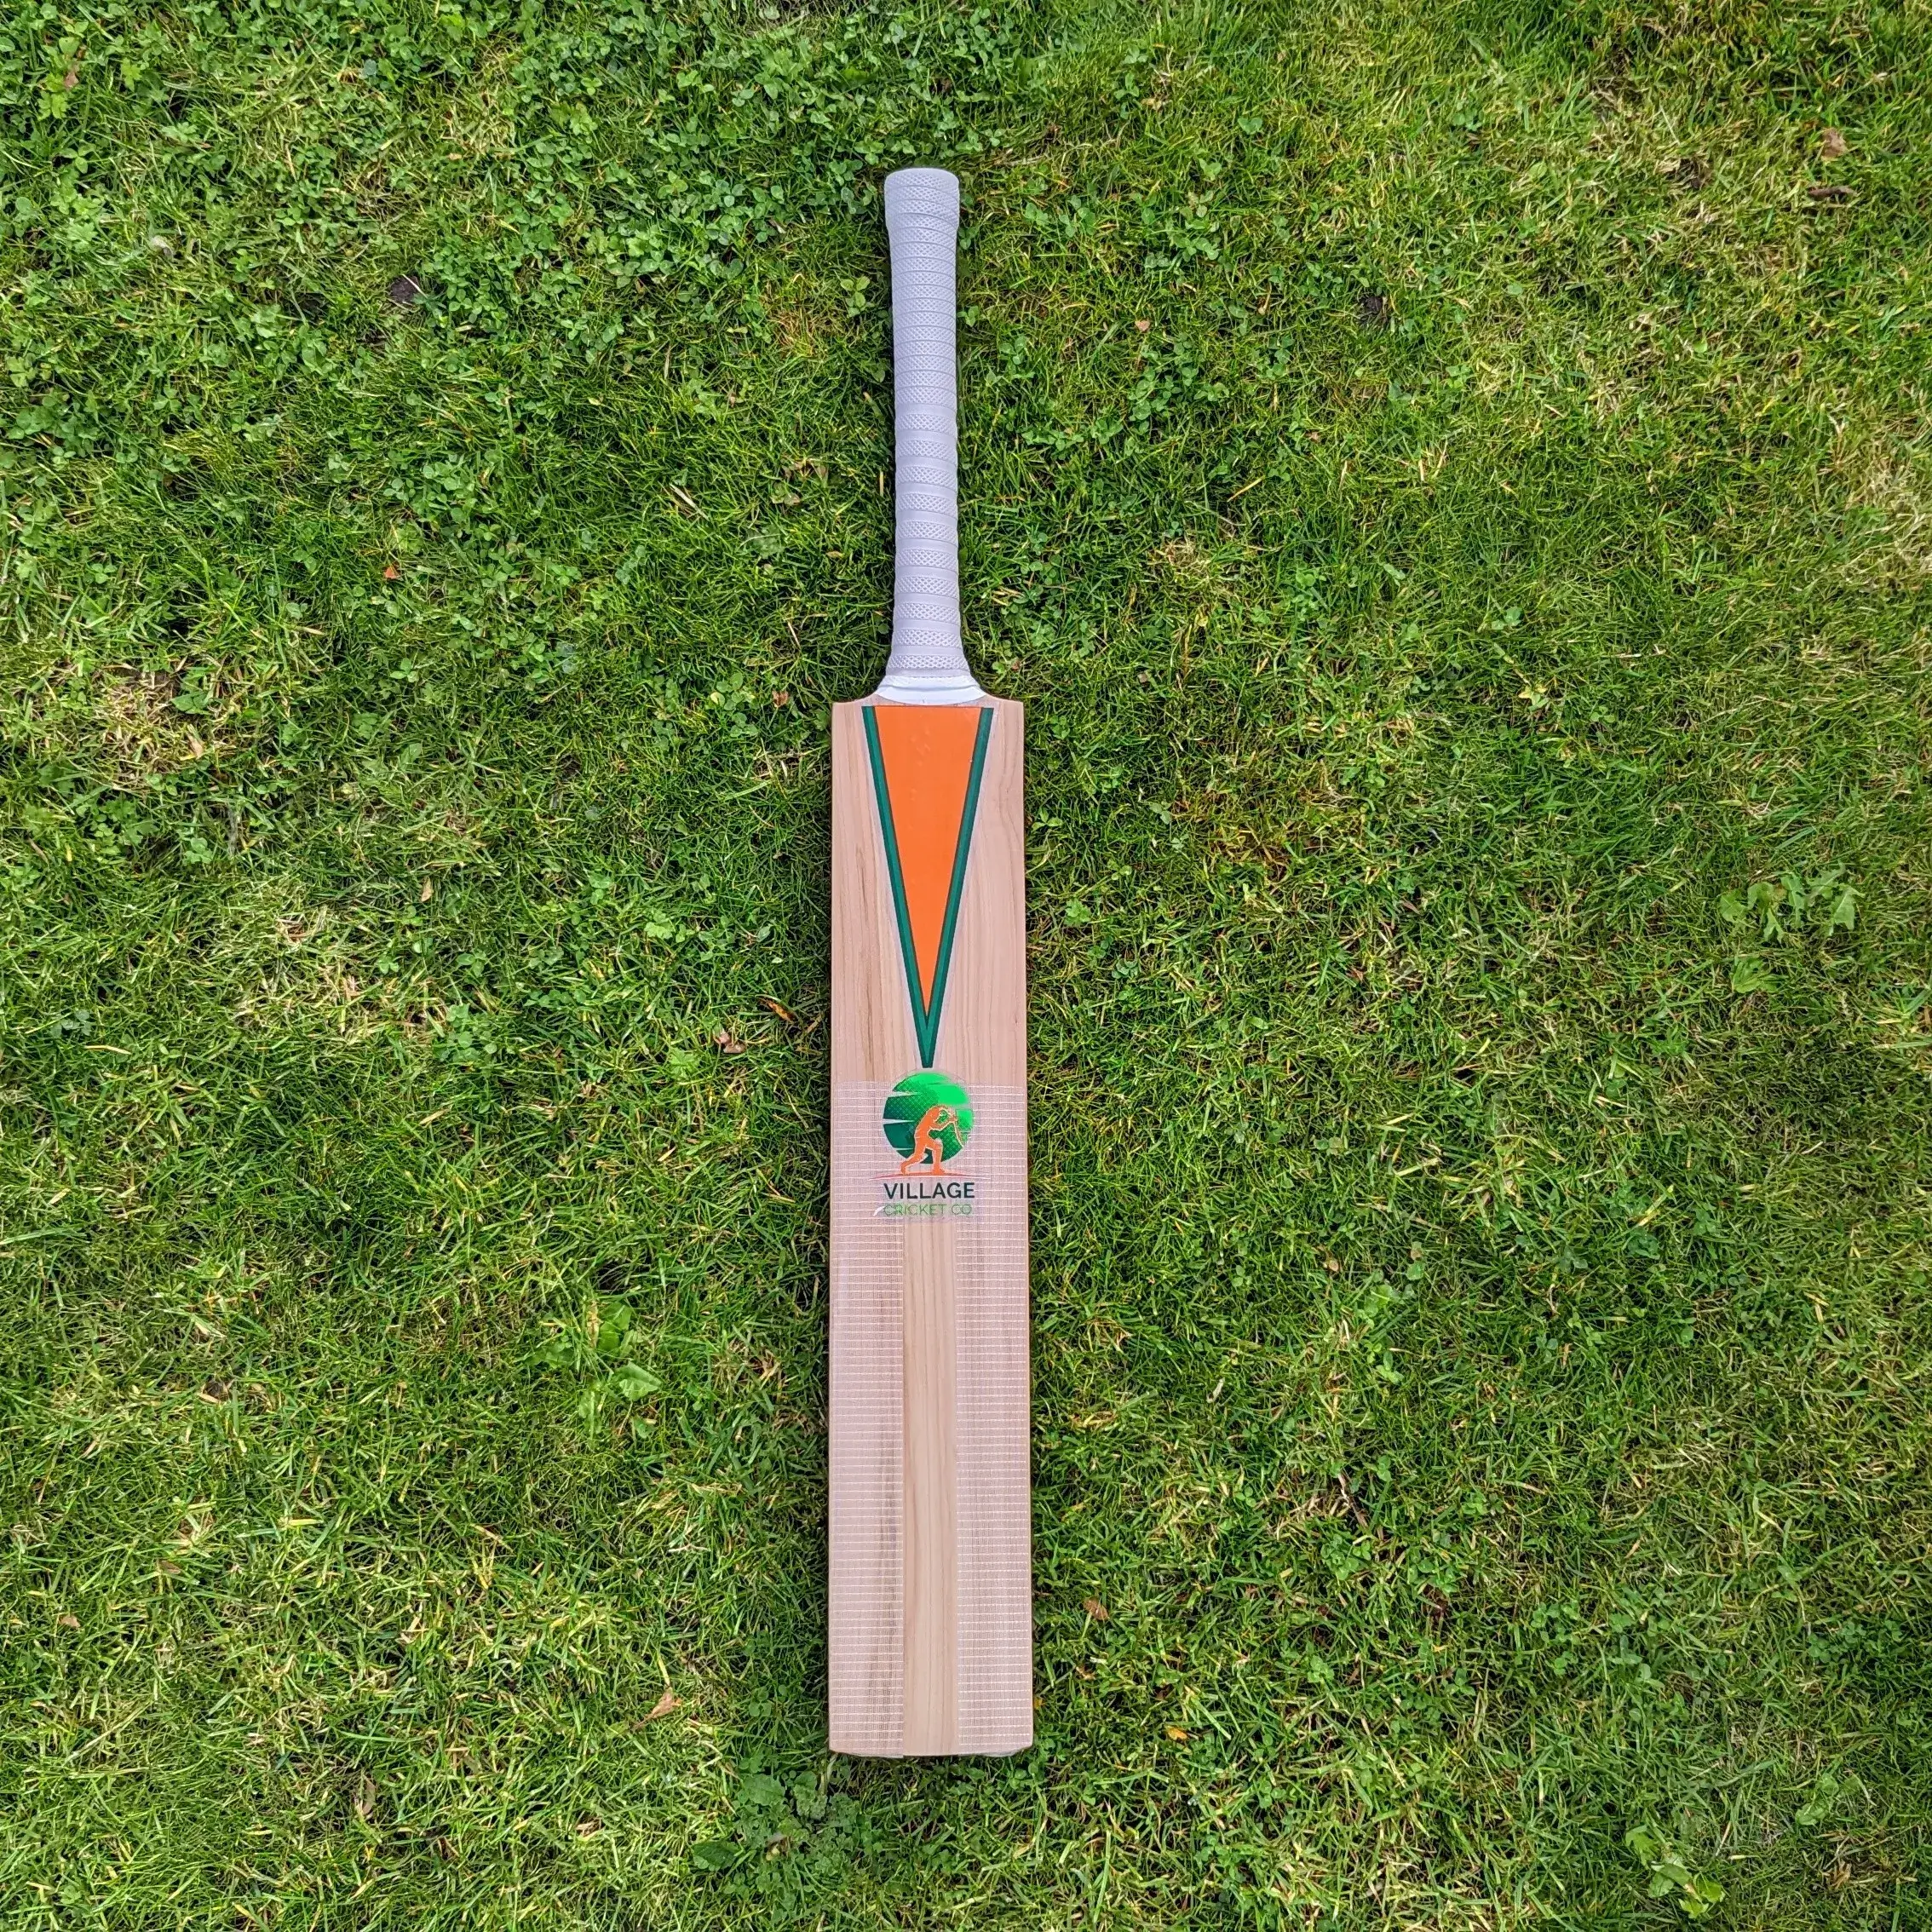 A Review of the Village Cricket Co Cricket Bat